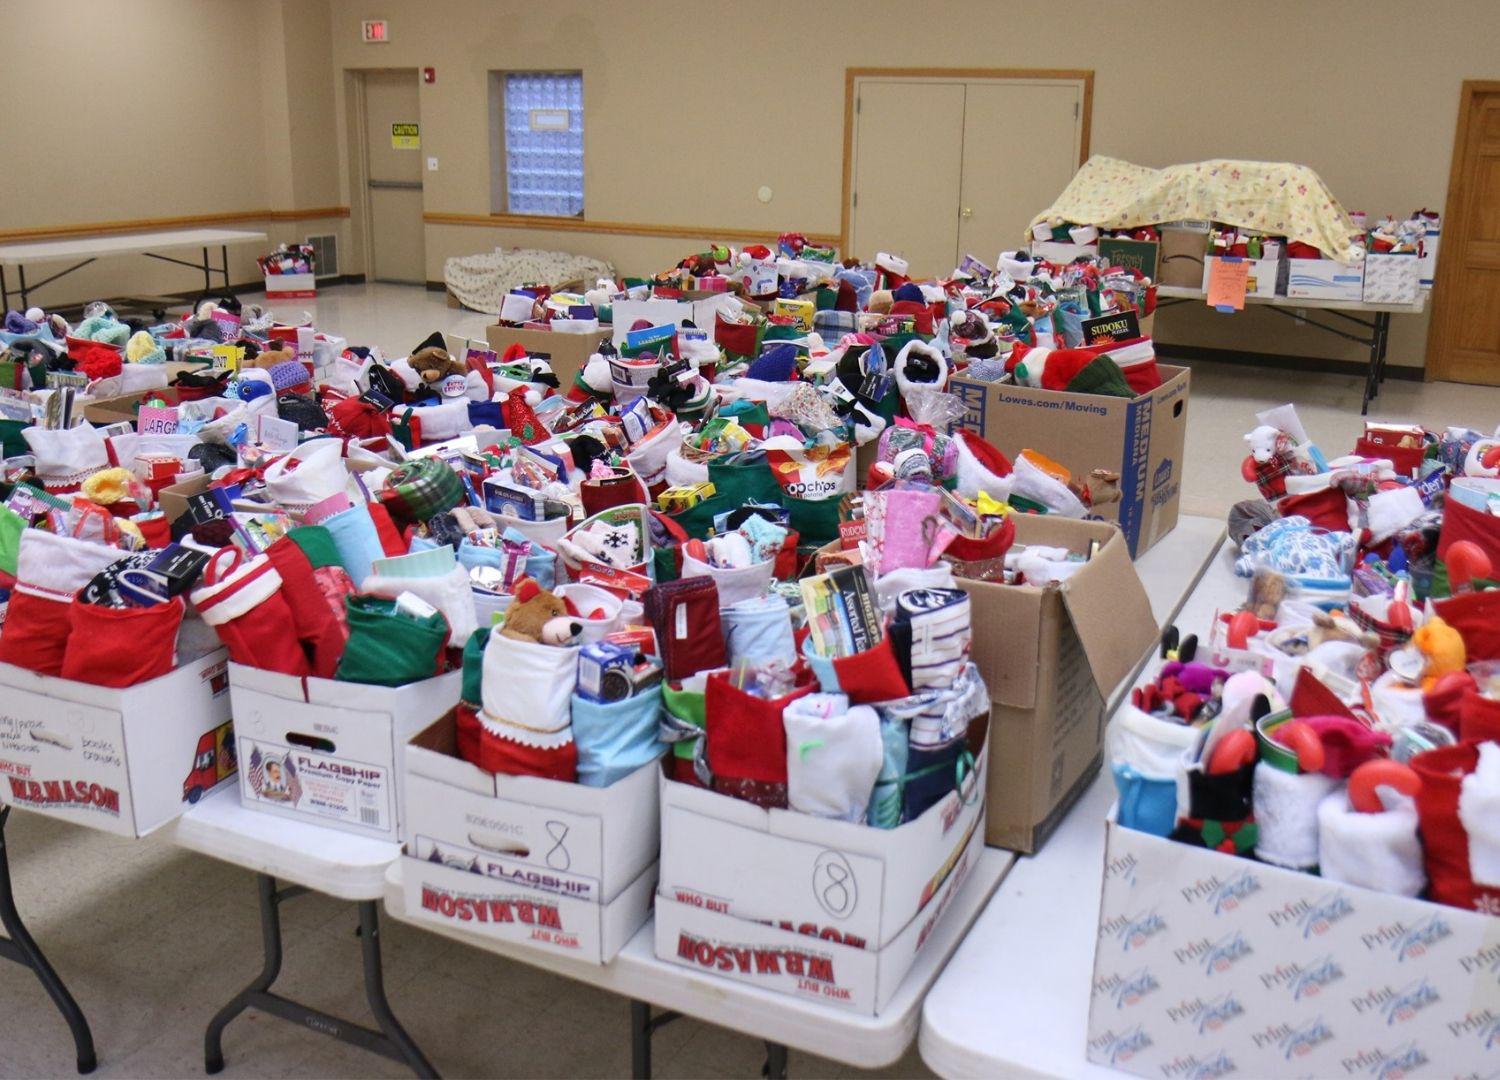 One Hour Butler employees participating in the Hang Tough stocking drive